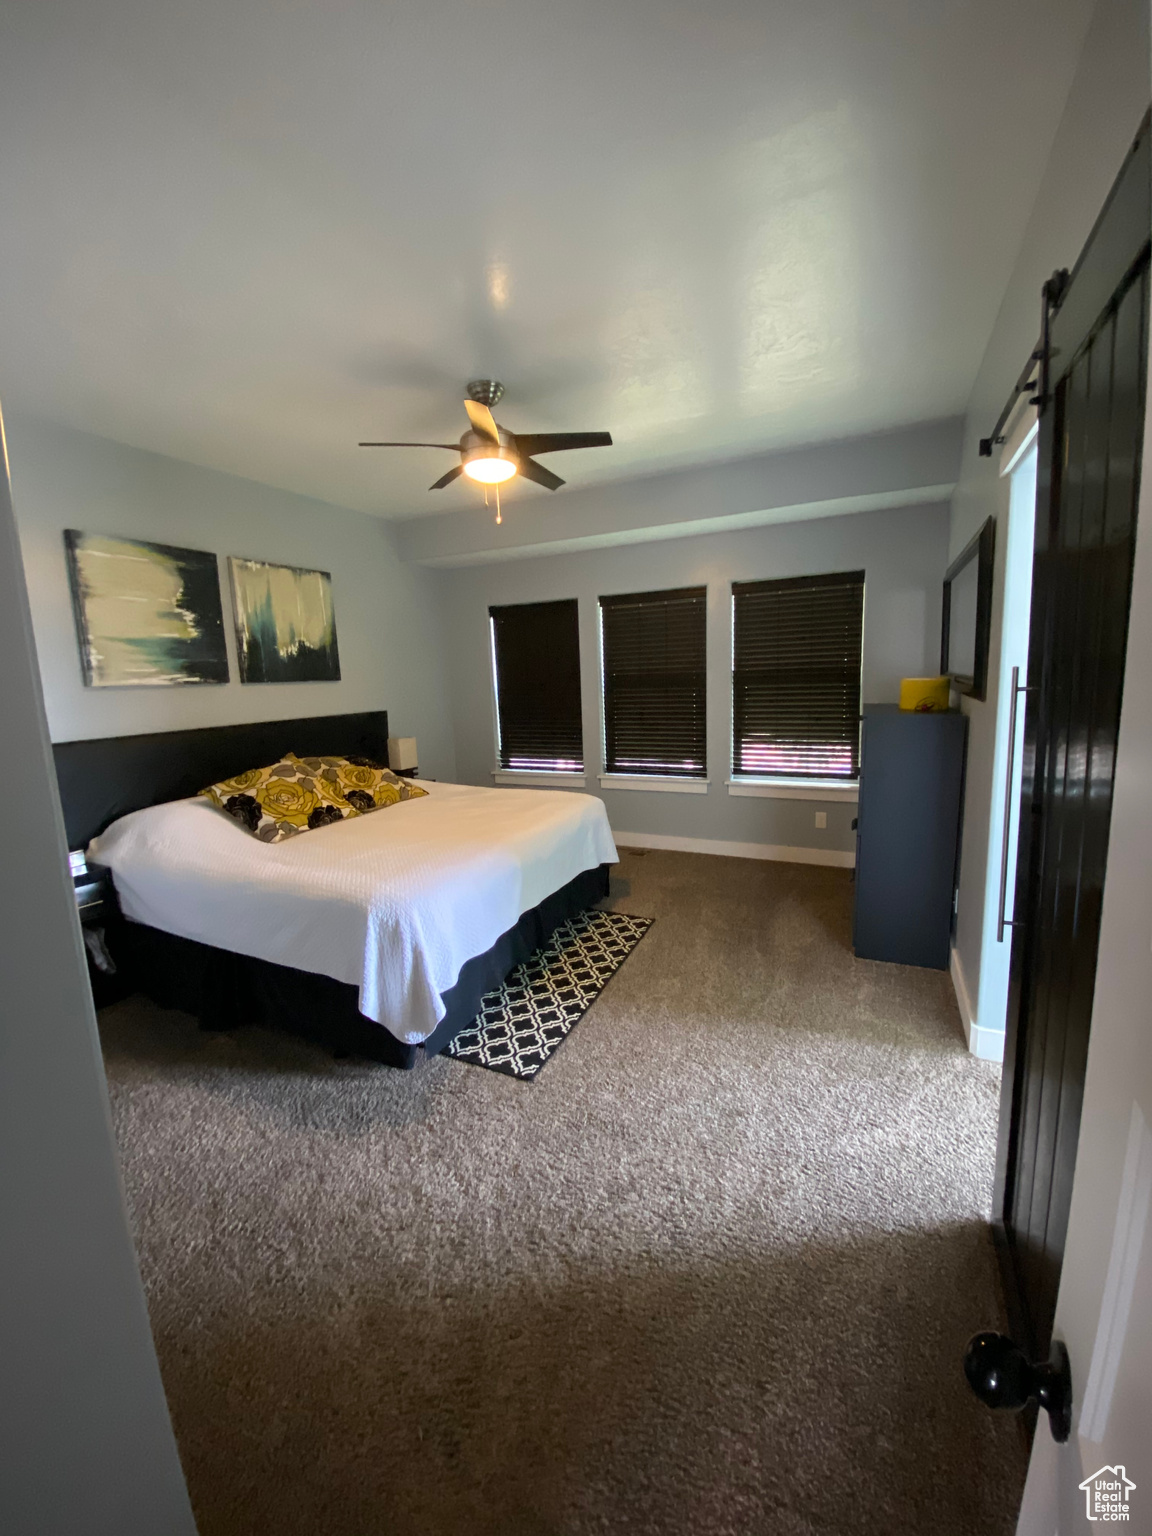 Bedroom featuring dark colored carpet, ceiling fan, and a barn door